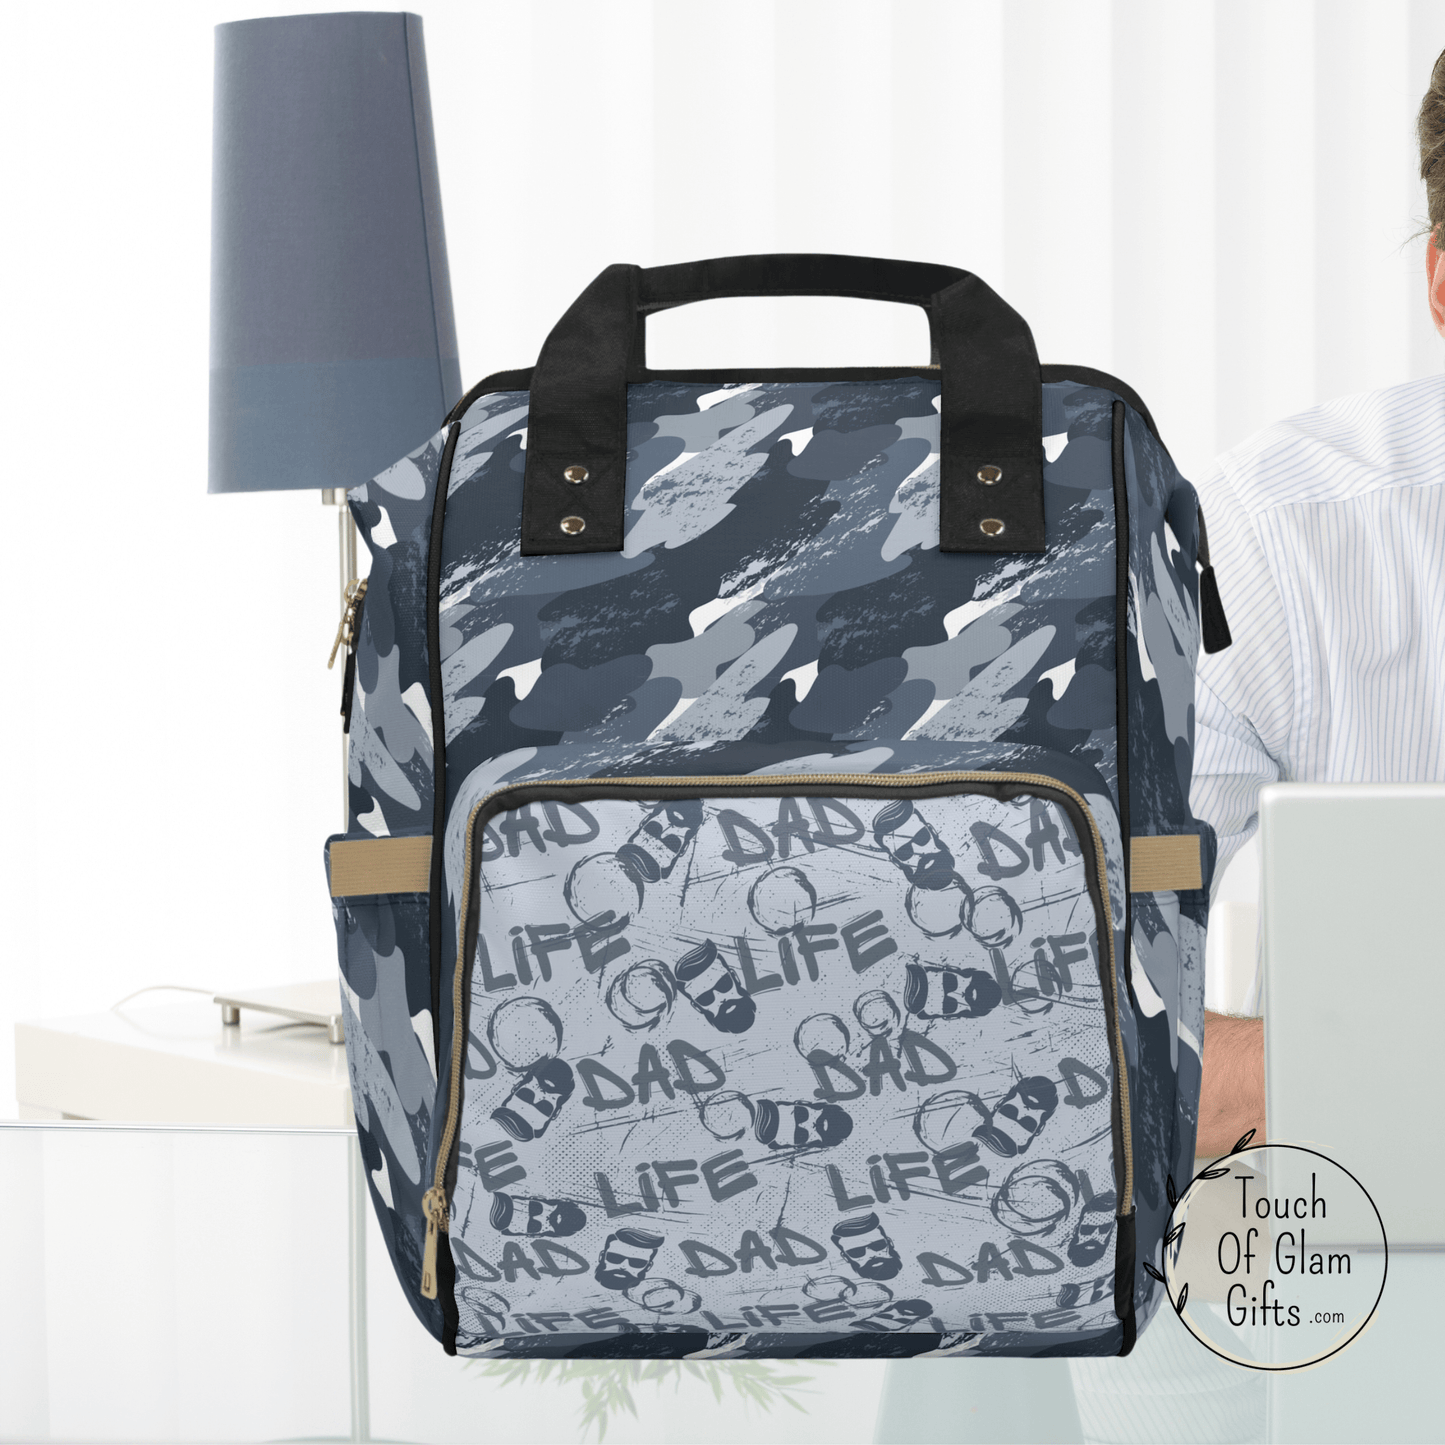 This dad has his dad life diaper bag ready to go on his desk. This stylish masculine backpack is the perfect Fathers day gift for new dads. Dads dont want to carry a feminine diaper bag and love the fact someone thought of them.